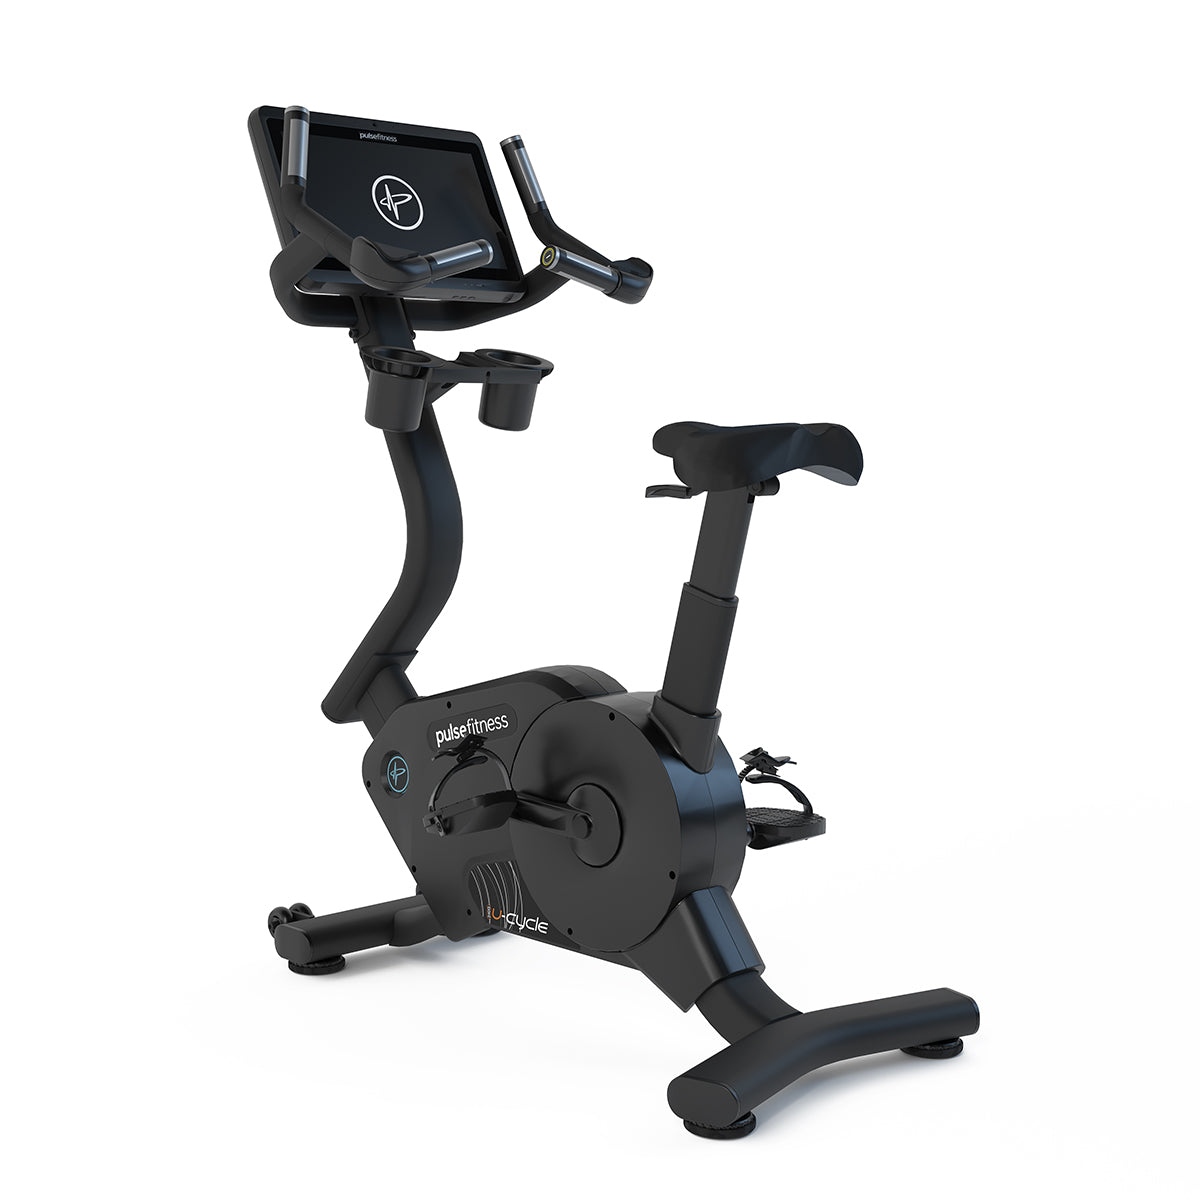 Pulse Fitness Premium Upright Cycle with 18.5" Touchscreen Console